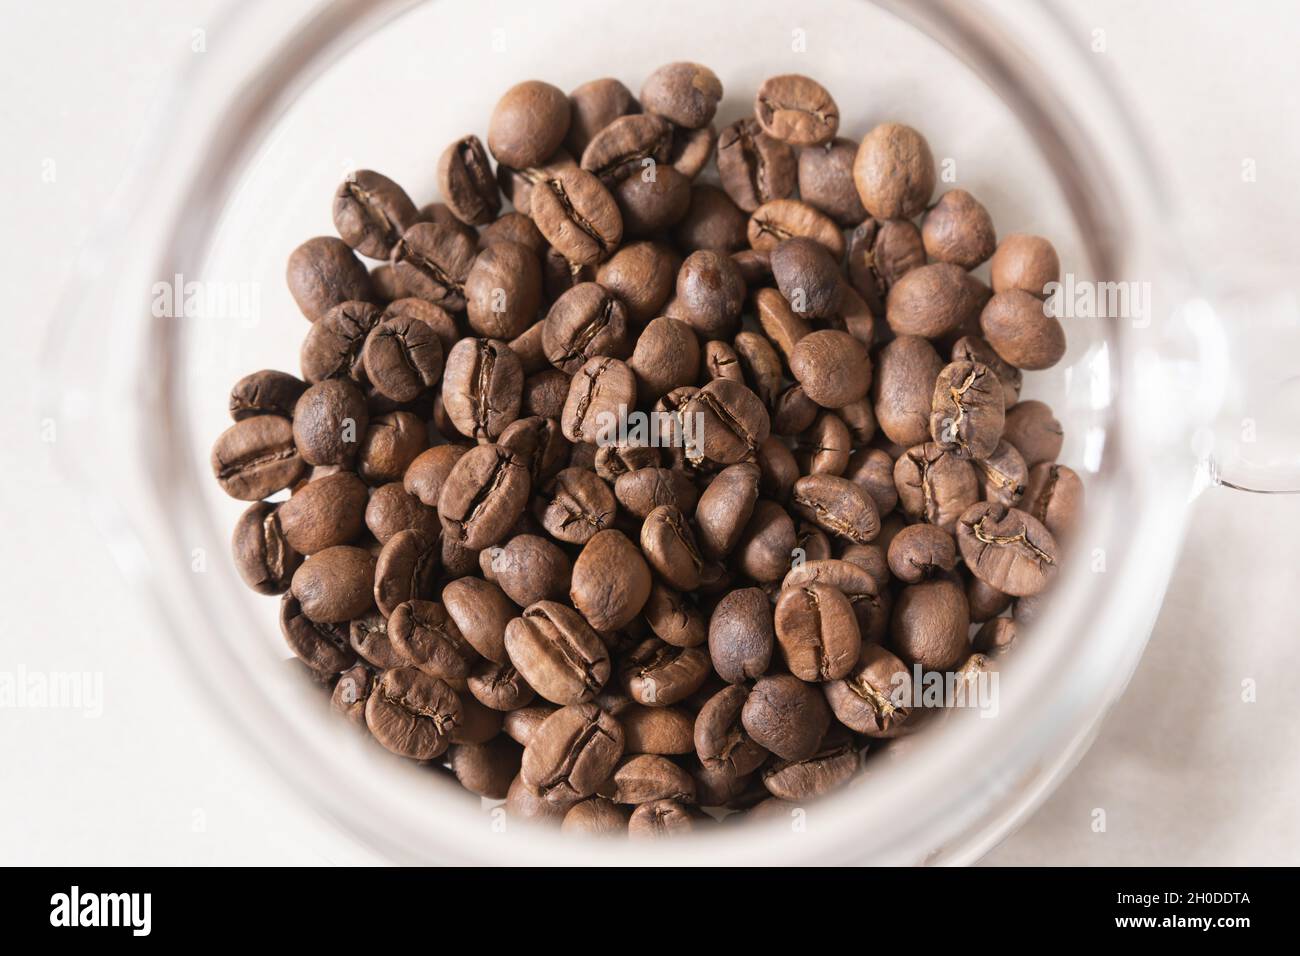 Roasted coffee beans in a glass jug Stock Photo